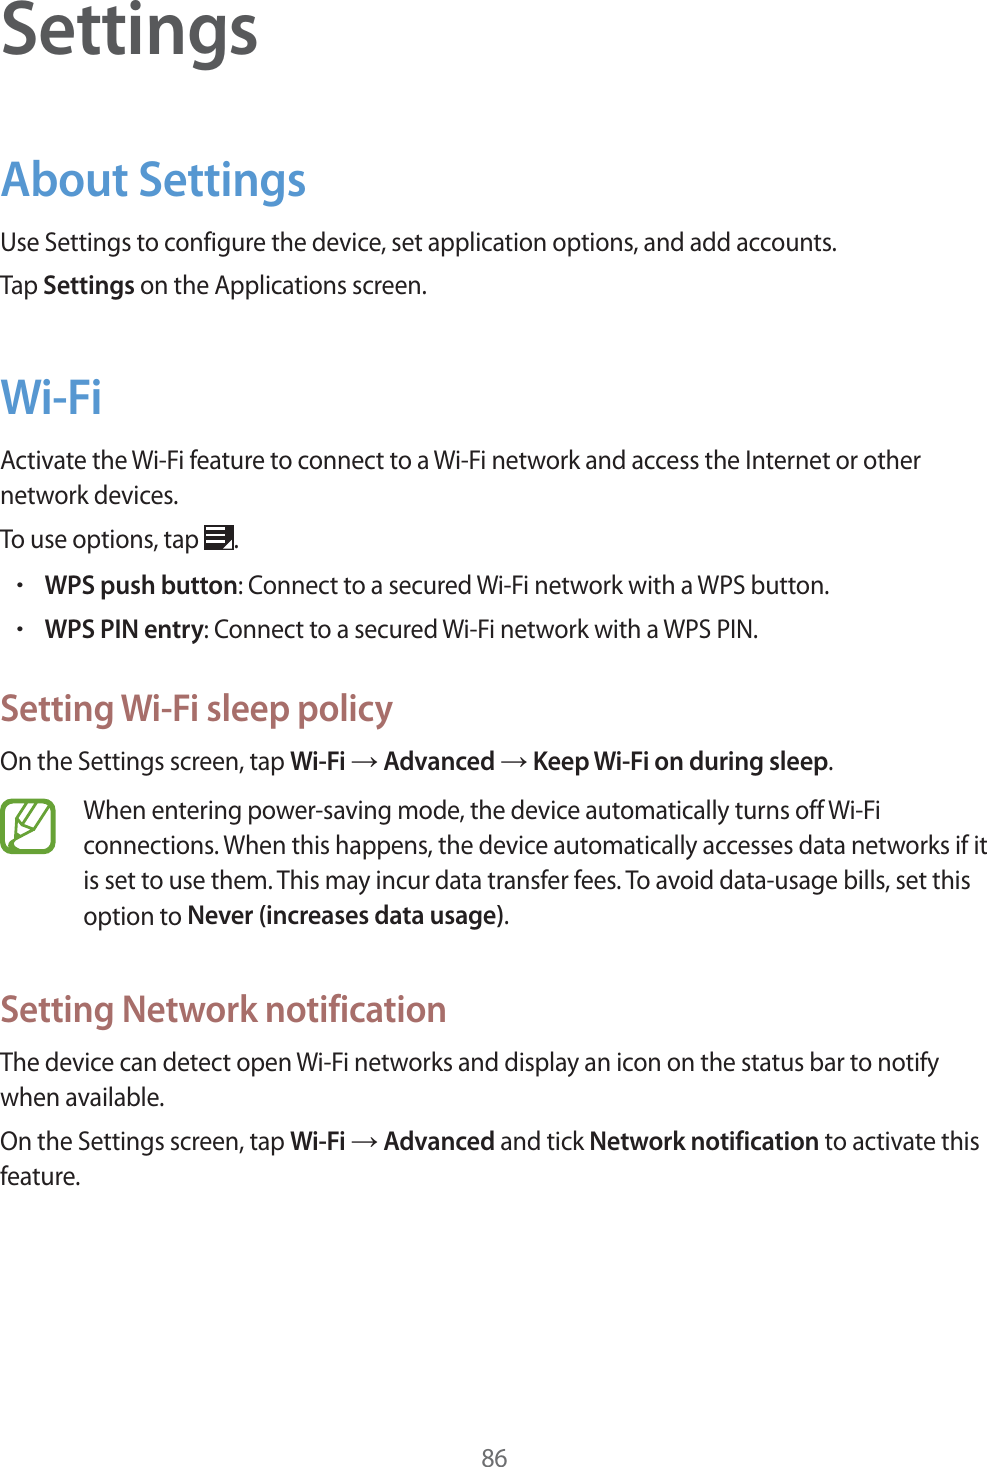 86SettingsAbout SettingsUse Settings to configure the device, set application options, and add accounts.Tap Settings on the Applications screen.Wi-FiActivate the Wi-Fi feature to connect to a Wi-Fi network and access the Internet or other network devices.To use options, tap  .rWPS push button: Connect to a secured Wi-Fi network with a WPS button.rWPS PIN entry: Connect to a secured Wi-Fi network with a WPS PIN.Setting Wi-Fi sleep policyOn the Settings screen, tap Wi-Fi ĺ Advanced ĺ Keep Wi-Fi on during sleep.When entering power-saving mode, the device automatically turns off Wi-Fi connections. When this happens, the device automatically accesses data networks if it is set to use them. This may incur data transfer fees. To avoid data-usage bills, set this option to Never (increases data usage).Setting Network notificationThe device can detect open Wi-Fi networks and display an icon on the status bar to notify when available.On the Settings screen, tap Wi-Fi ĺ Advanced and tick Network notification to activate this feature.